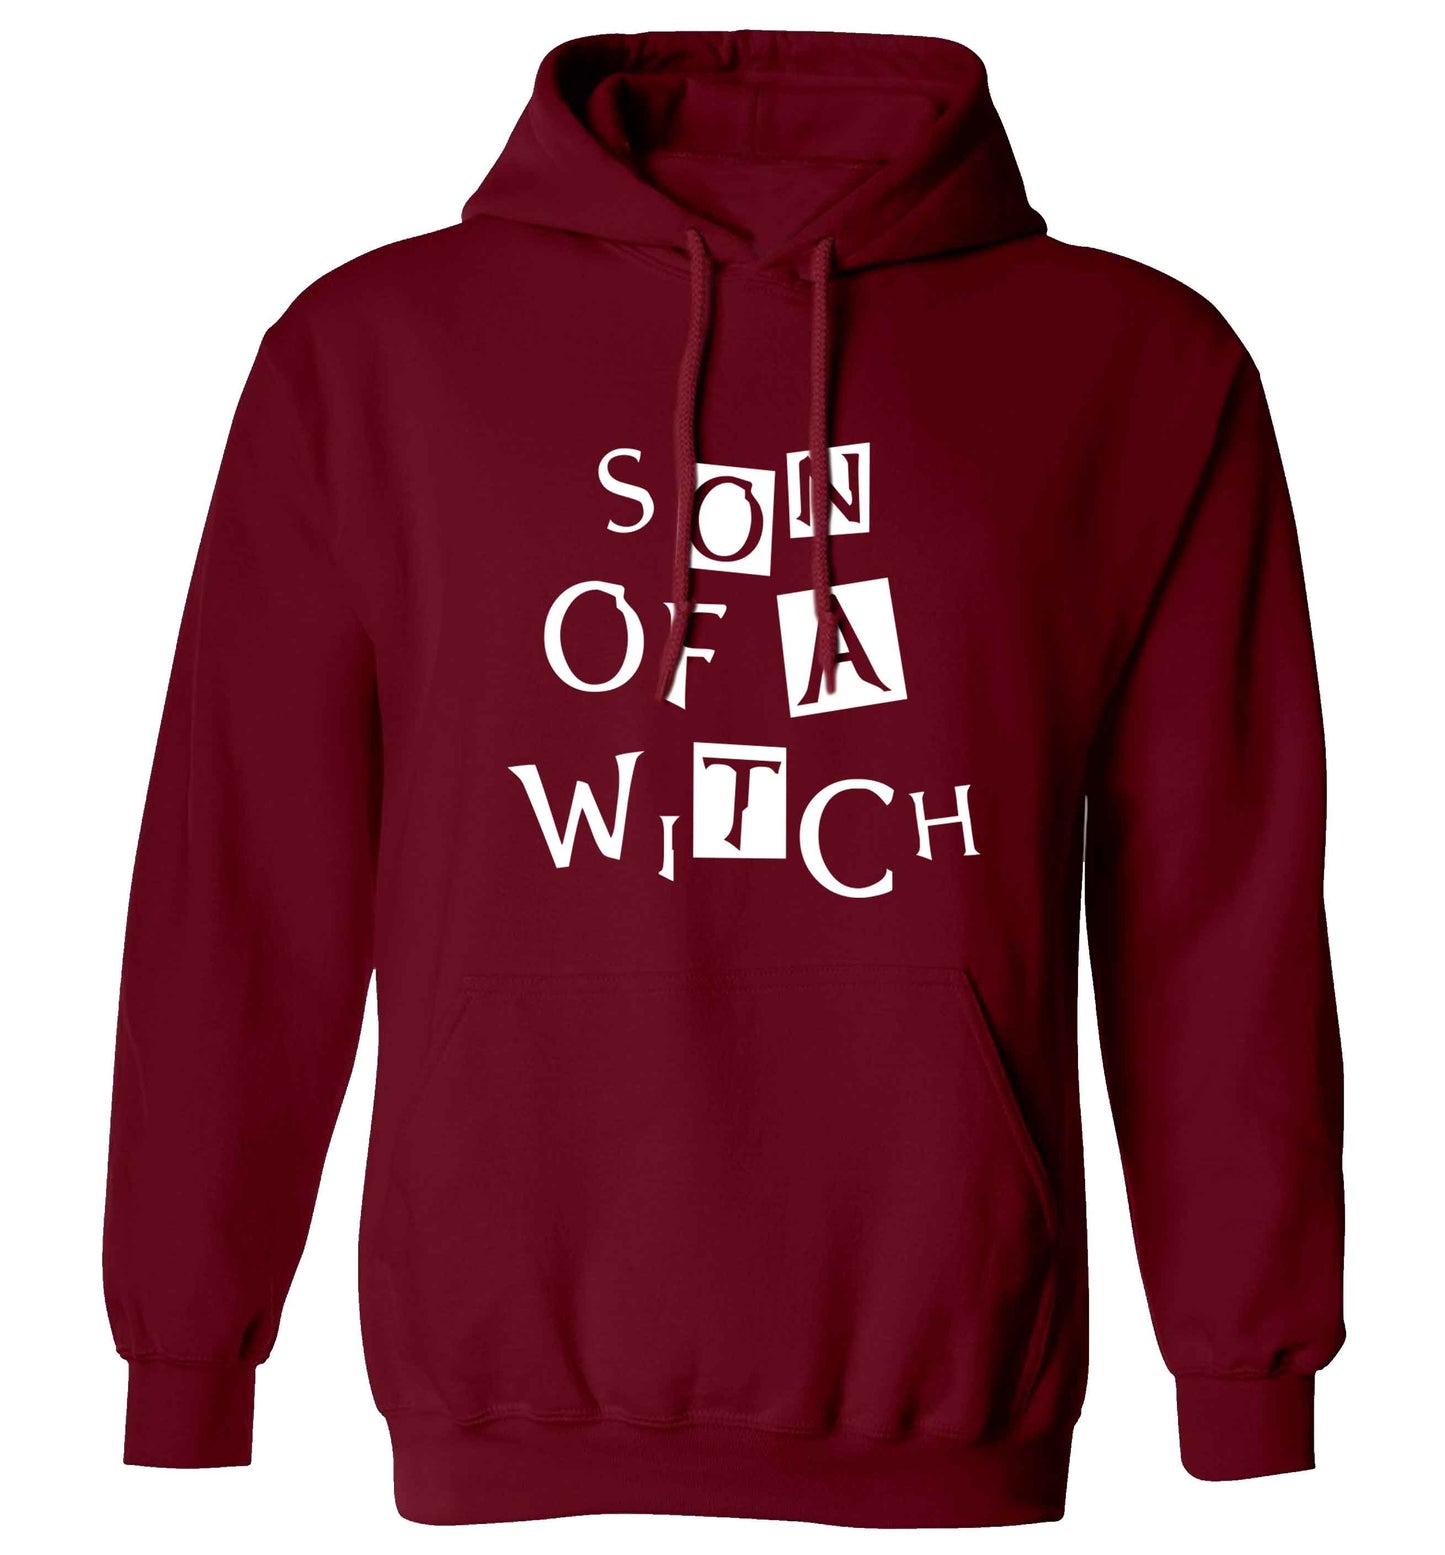 Son of a witch adults unisex maroon hoodie 2XL